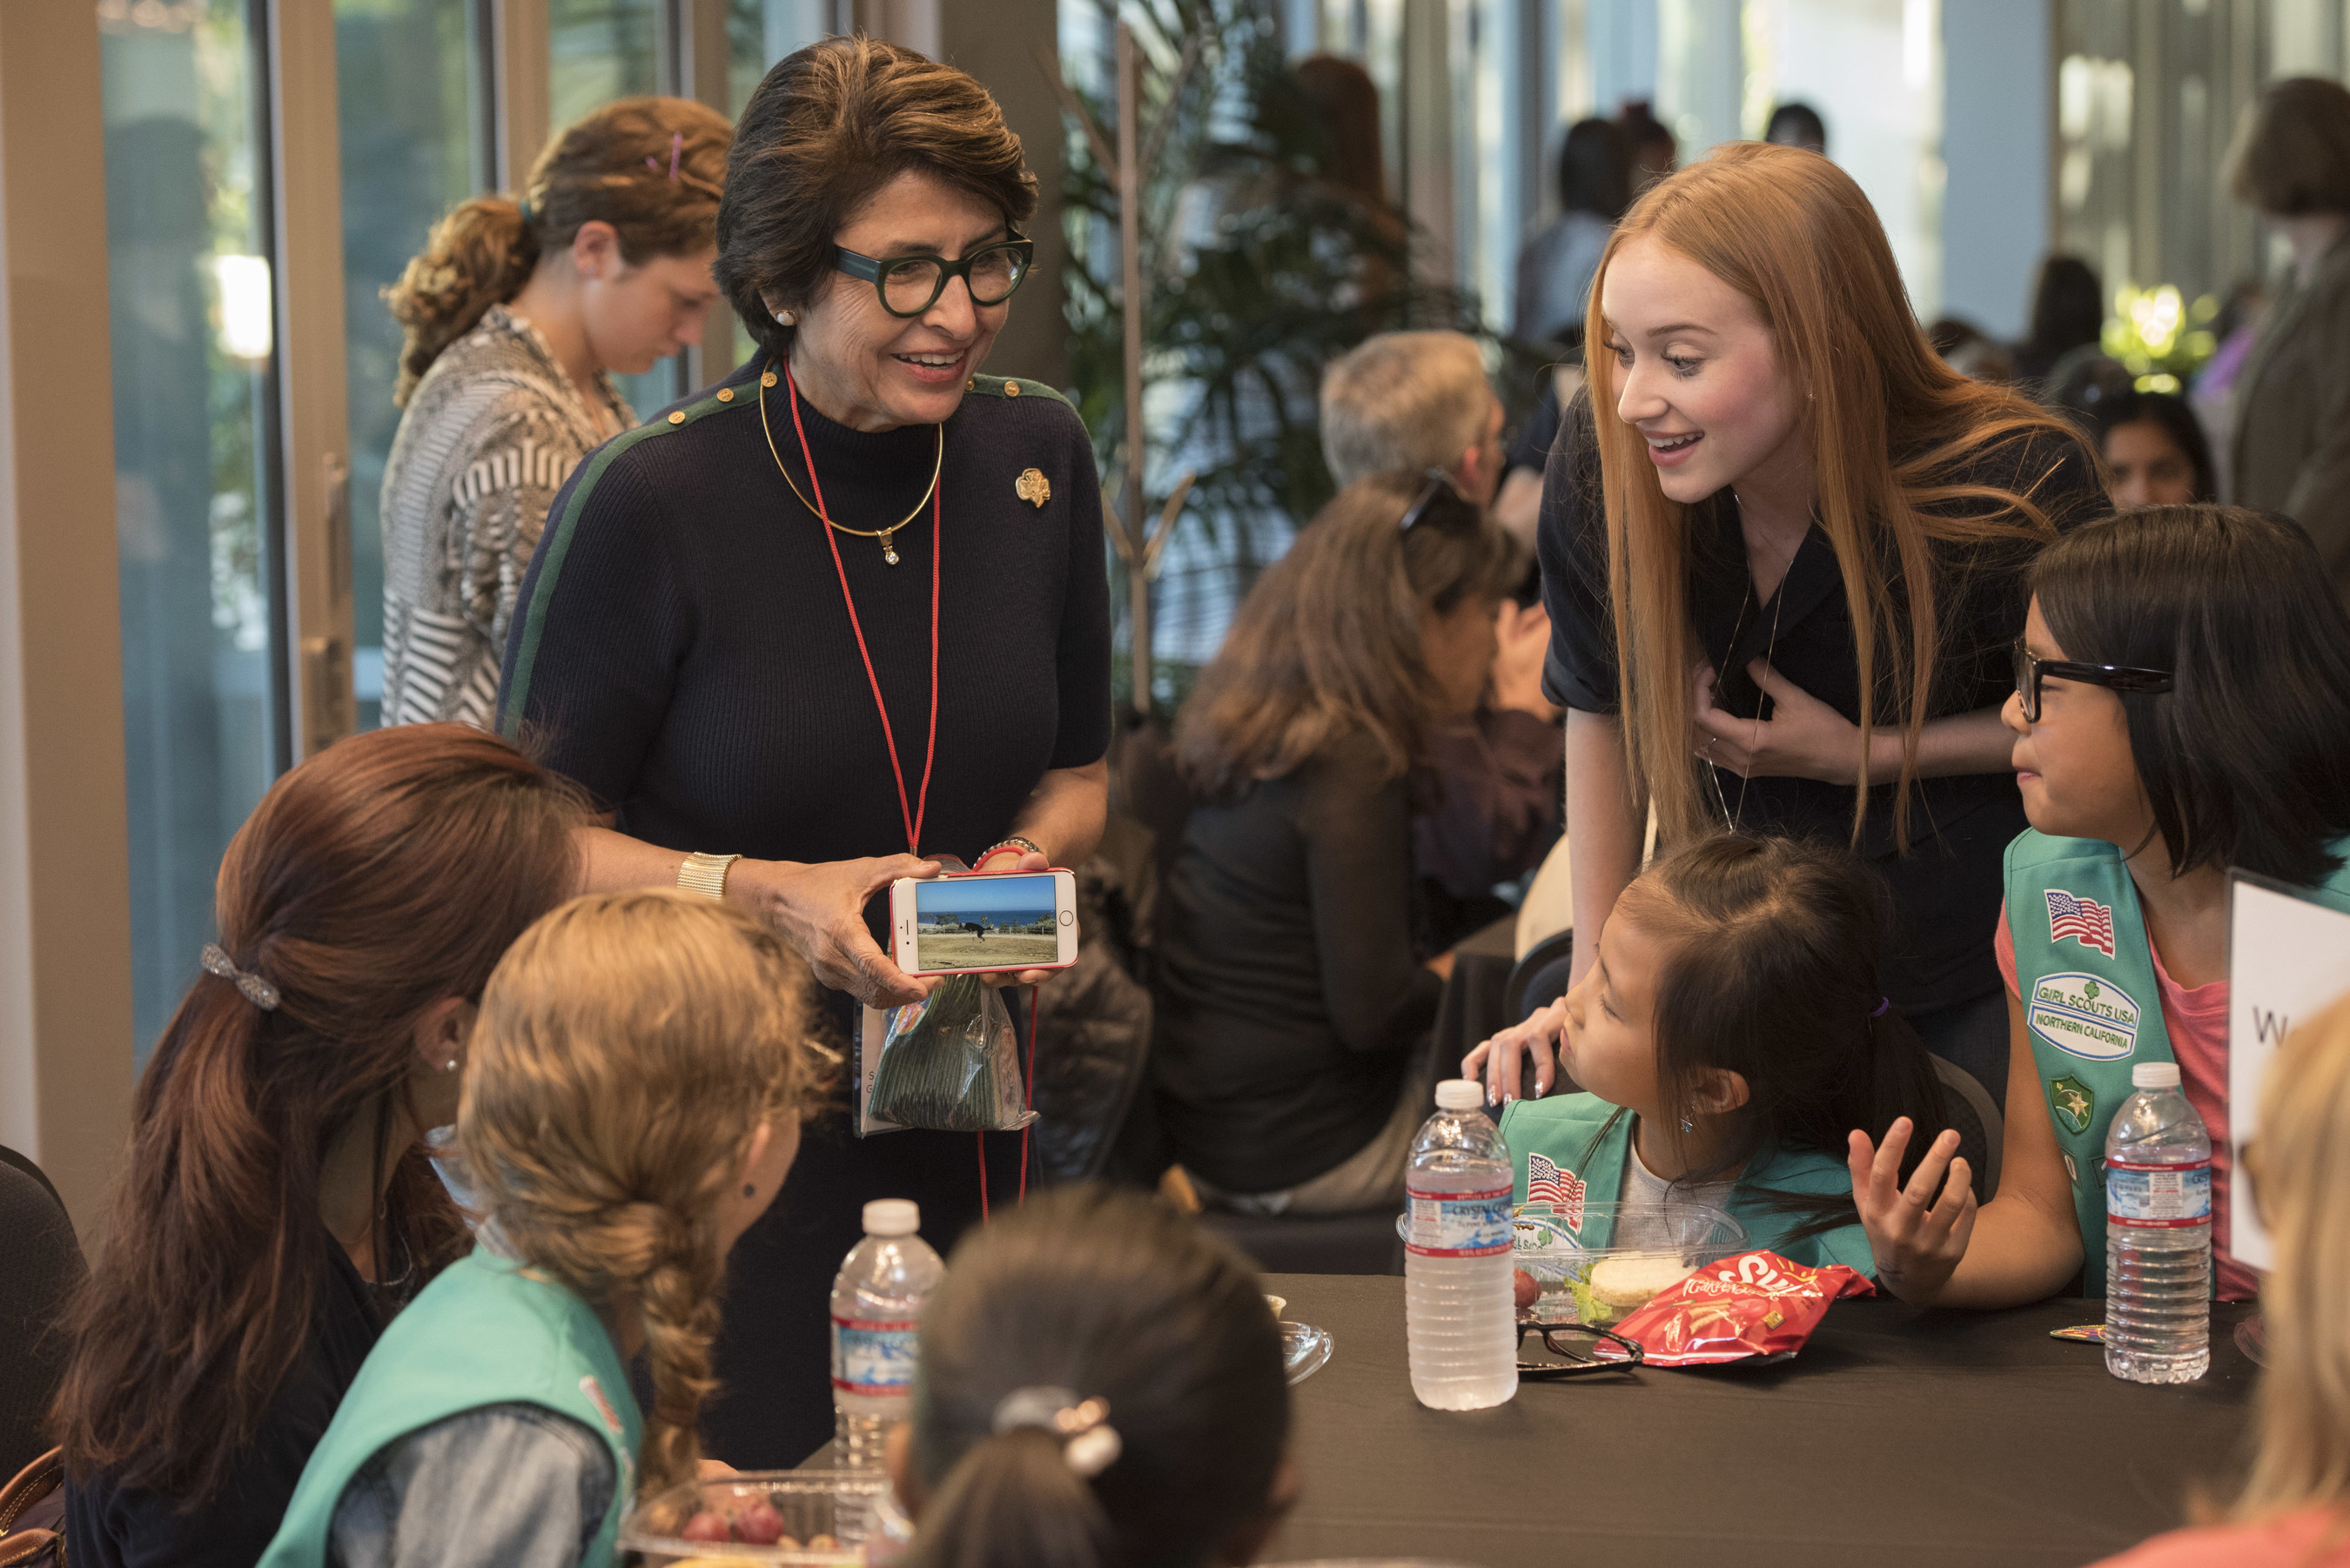 Girl Scouts of the USA Interim CEO, Sylvia Acevedo, left, and Project Mc2 cast member, Belle Shouse, right, trade STEM stories with local Girl Scouts at the "She Rules: STEM" event at Netflix headquarters in Los Gatos, Calif., Tuesday, Oct. 4, 2016. Girl Scout troops representing Girl Scouts of Northern California met with real-world STEM experts to encourage the pursuit of STEM career paths for young girls.